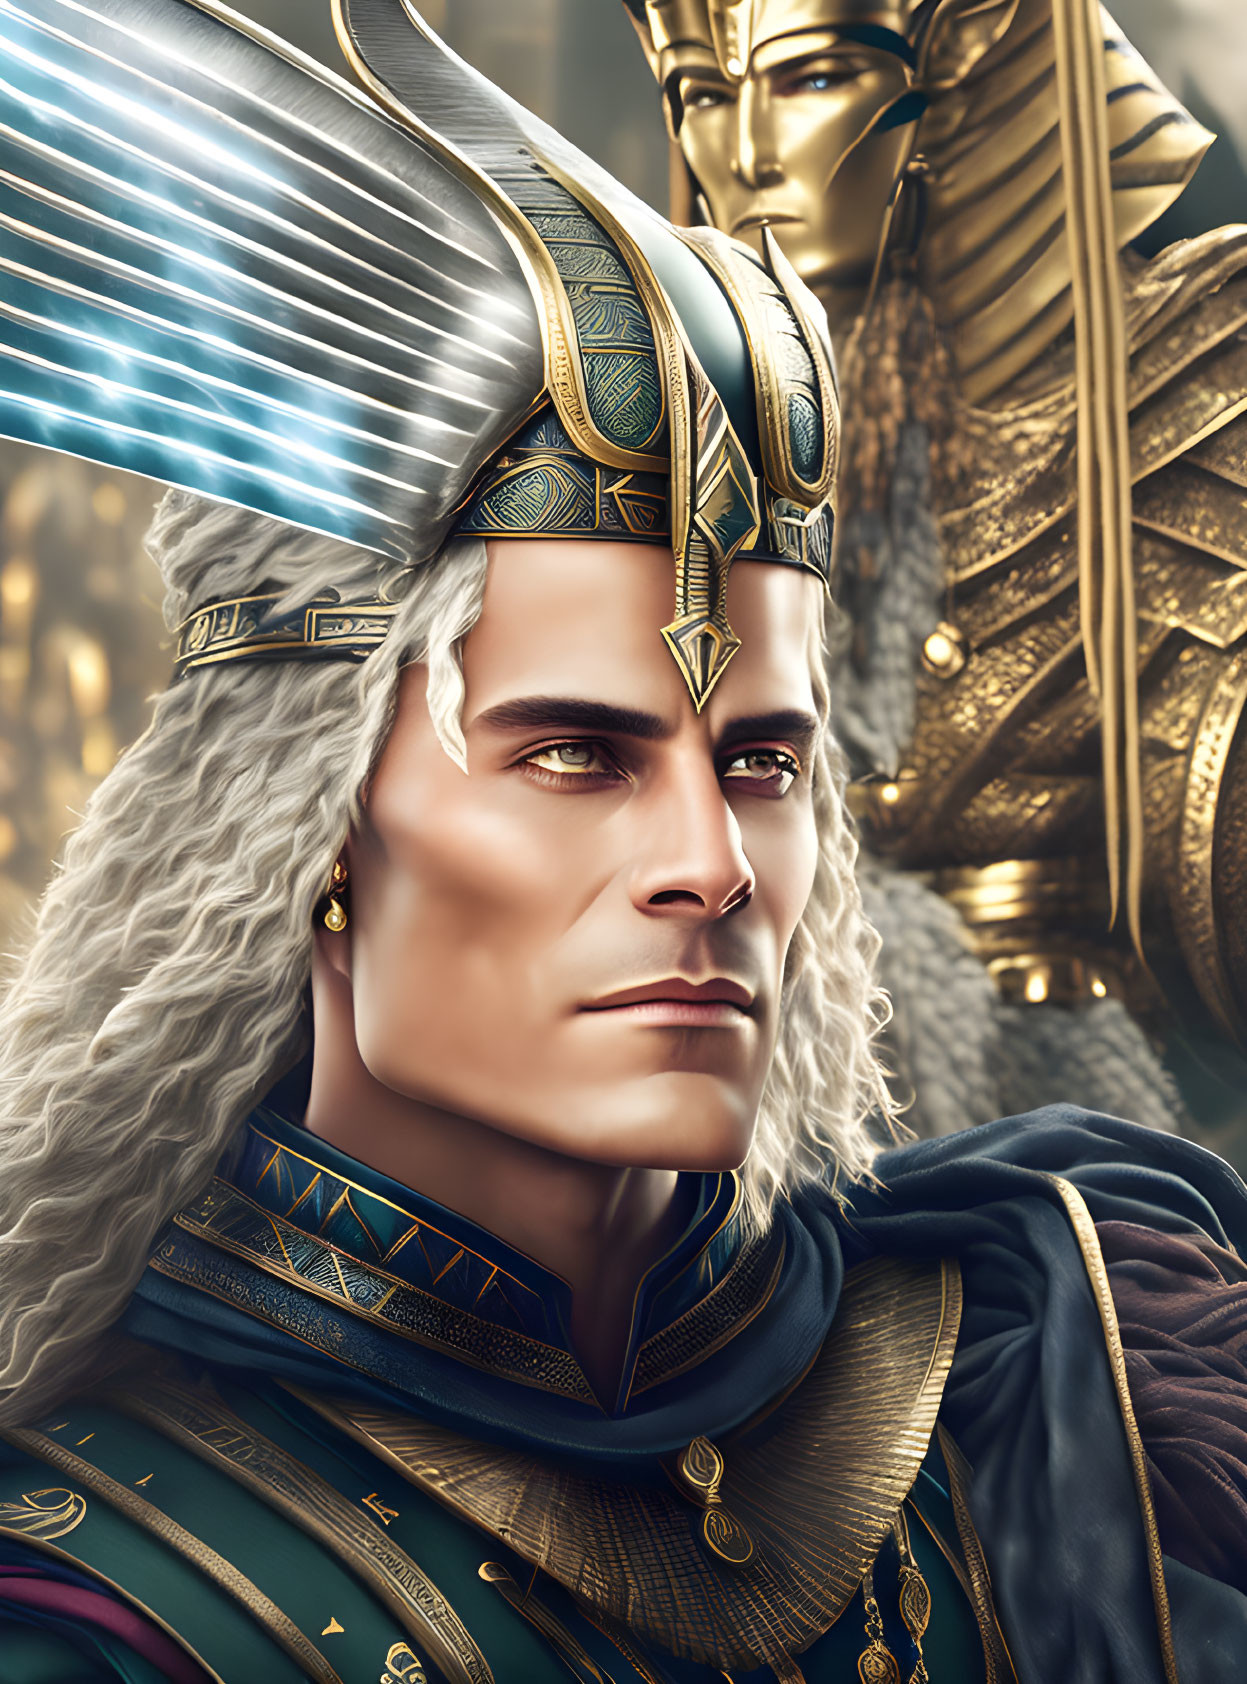 Detailed Illustration of Regal Character in Silver and Gold Winged Helmet